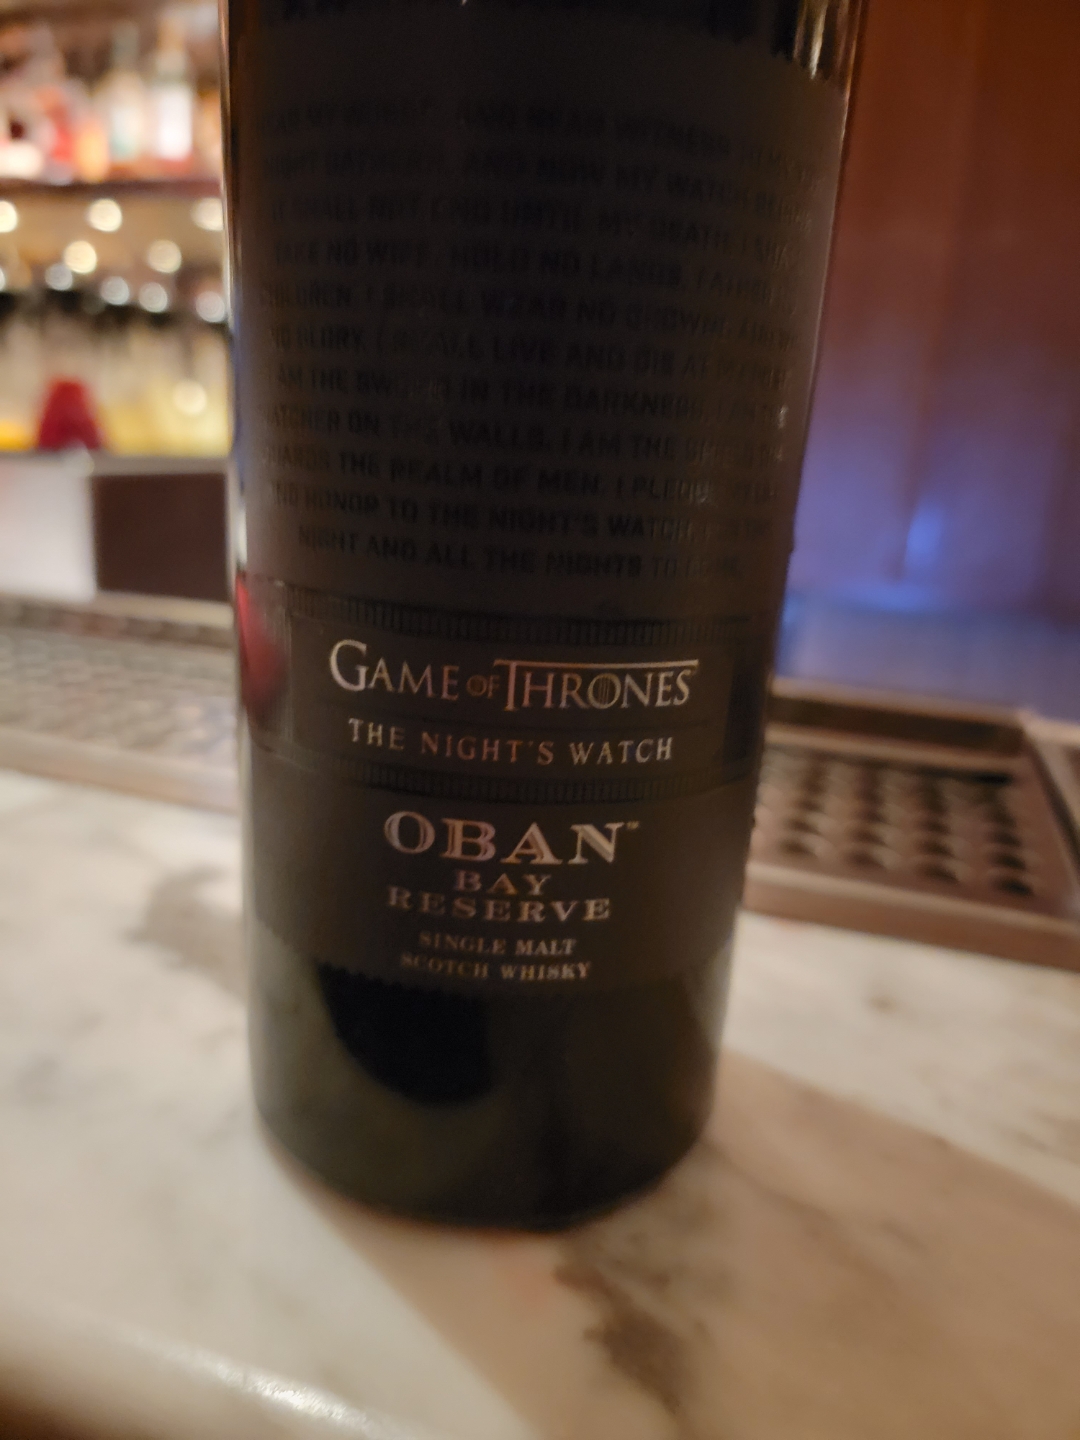 OBAN Bay Reserve, Game of Thrones The Nights Watch